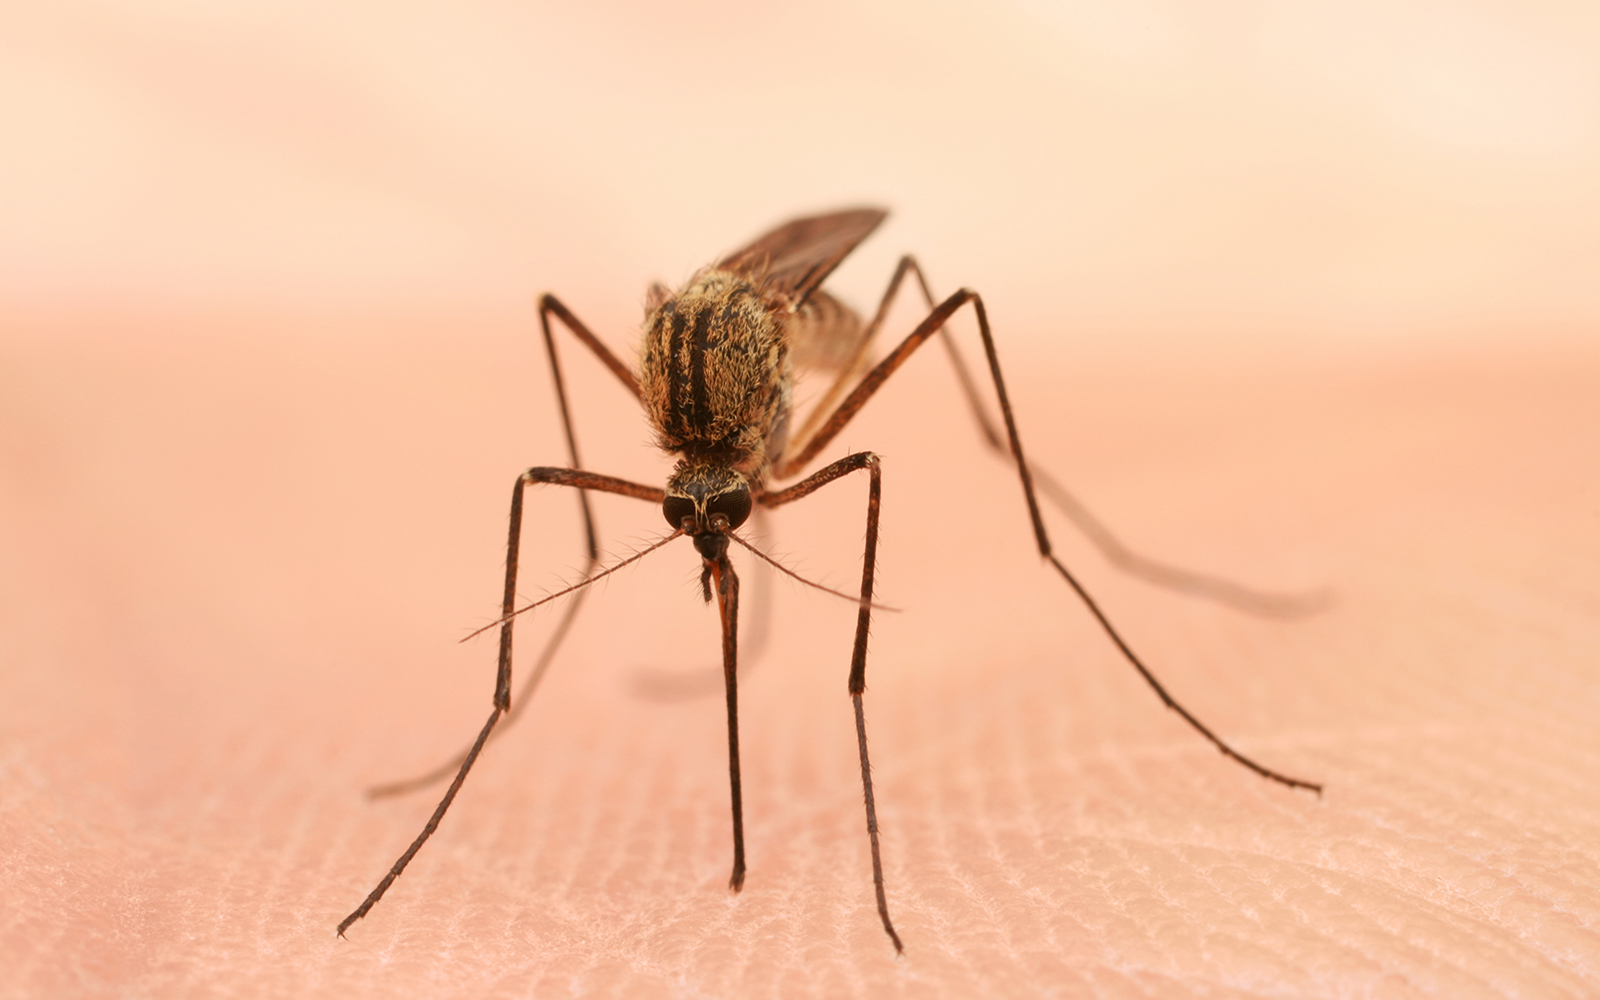 Fly Bites: 6 Types, Symptoms, and Treatment